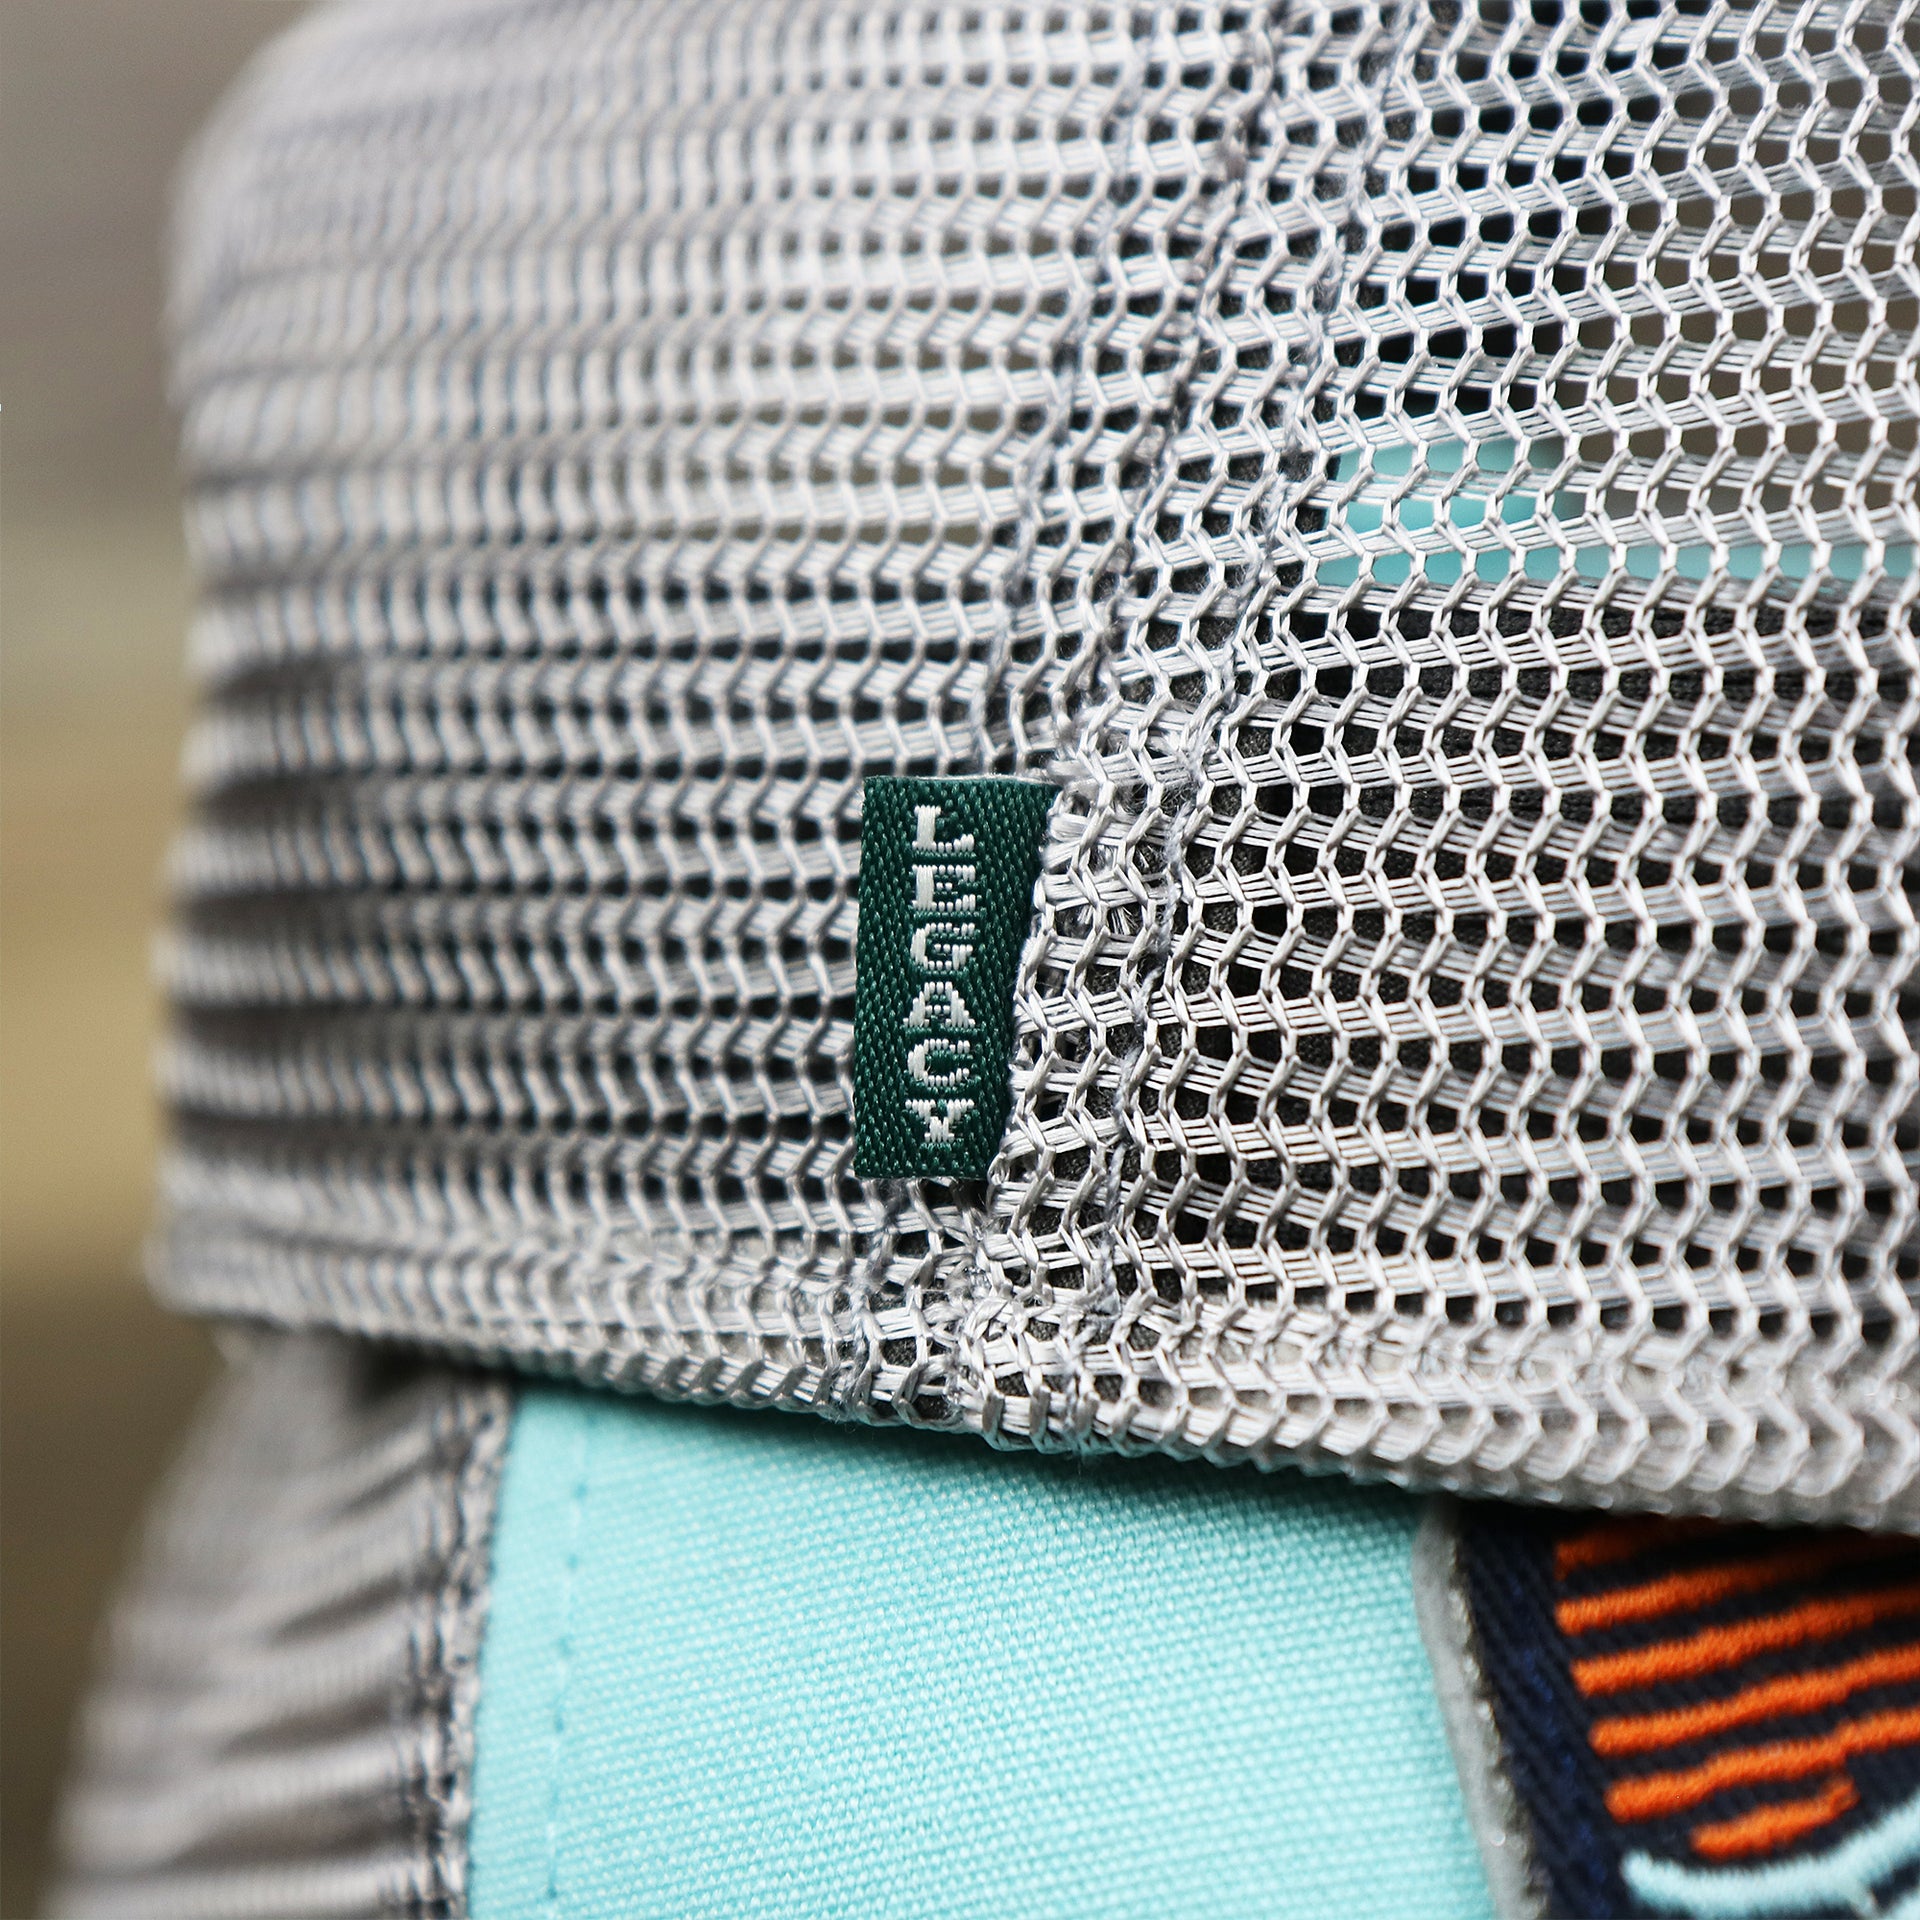 The Green Legacy Tag on the New Jersey Ocean City Sunset Mesh Back Trucker Hat | Tahiti Blue And Grey Mesh Trucker Hat